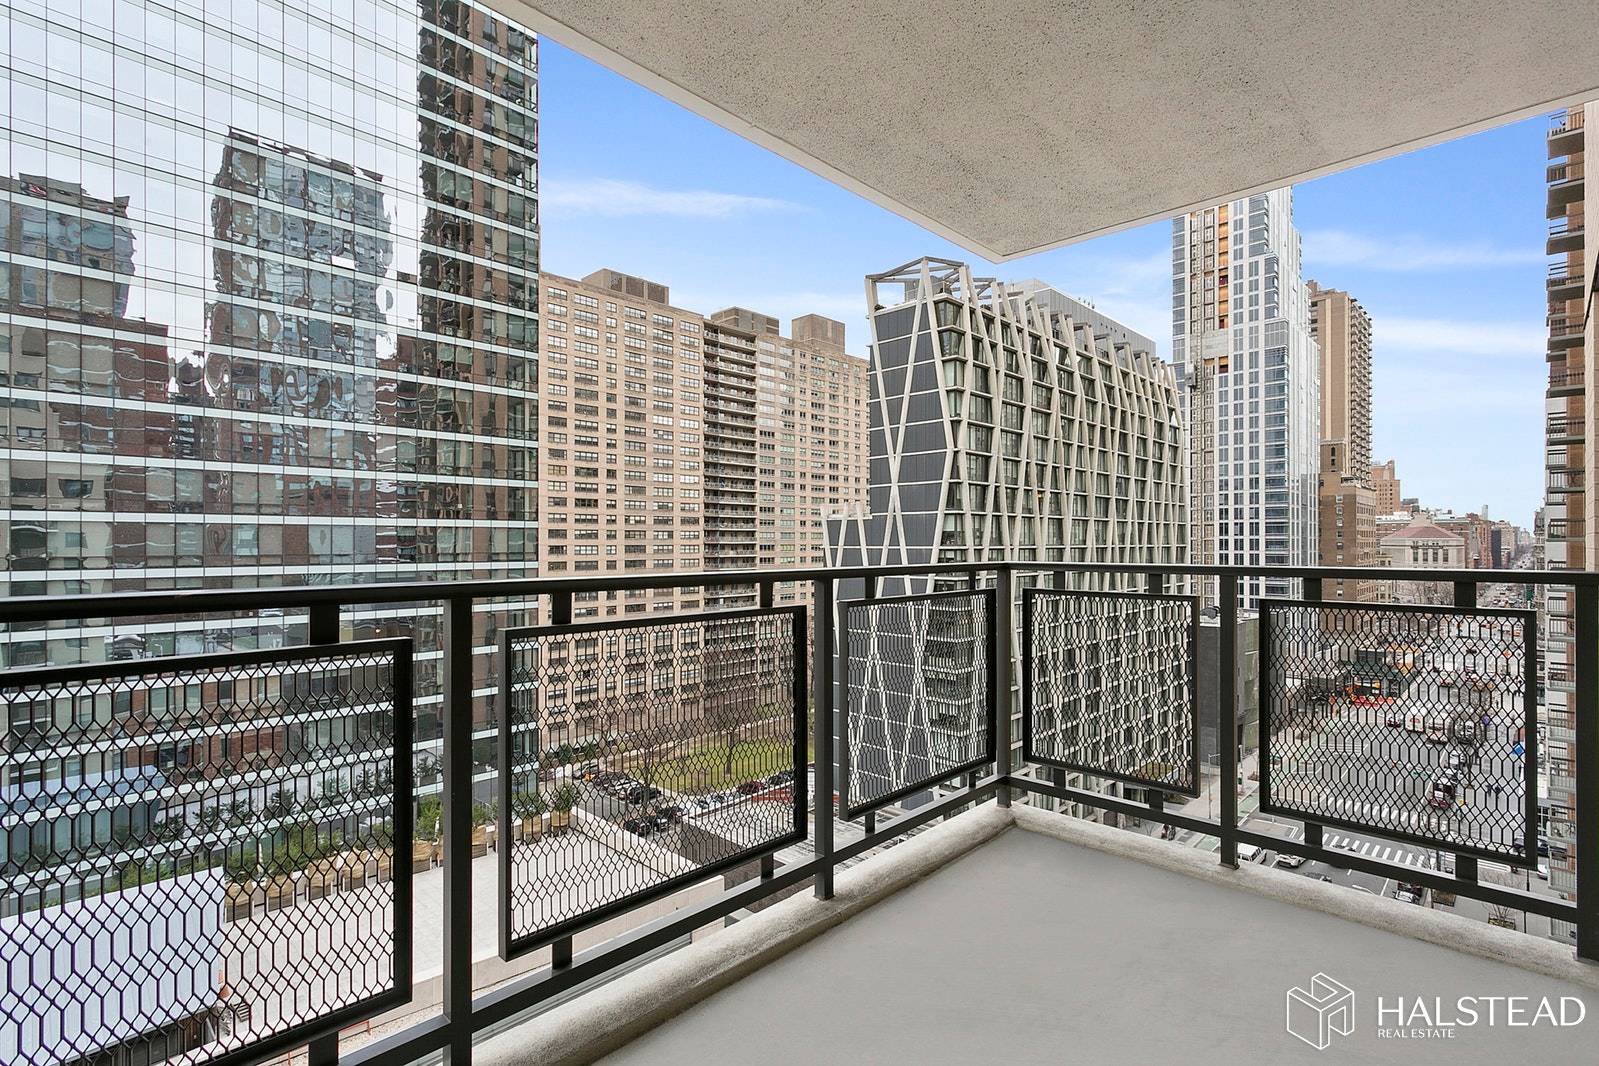 You'll feel right at home in this over sized bright apartment with great city views that include Western exposure.